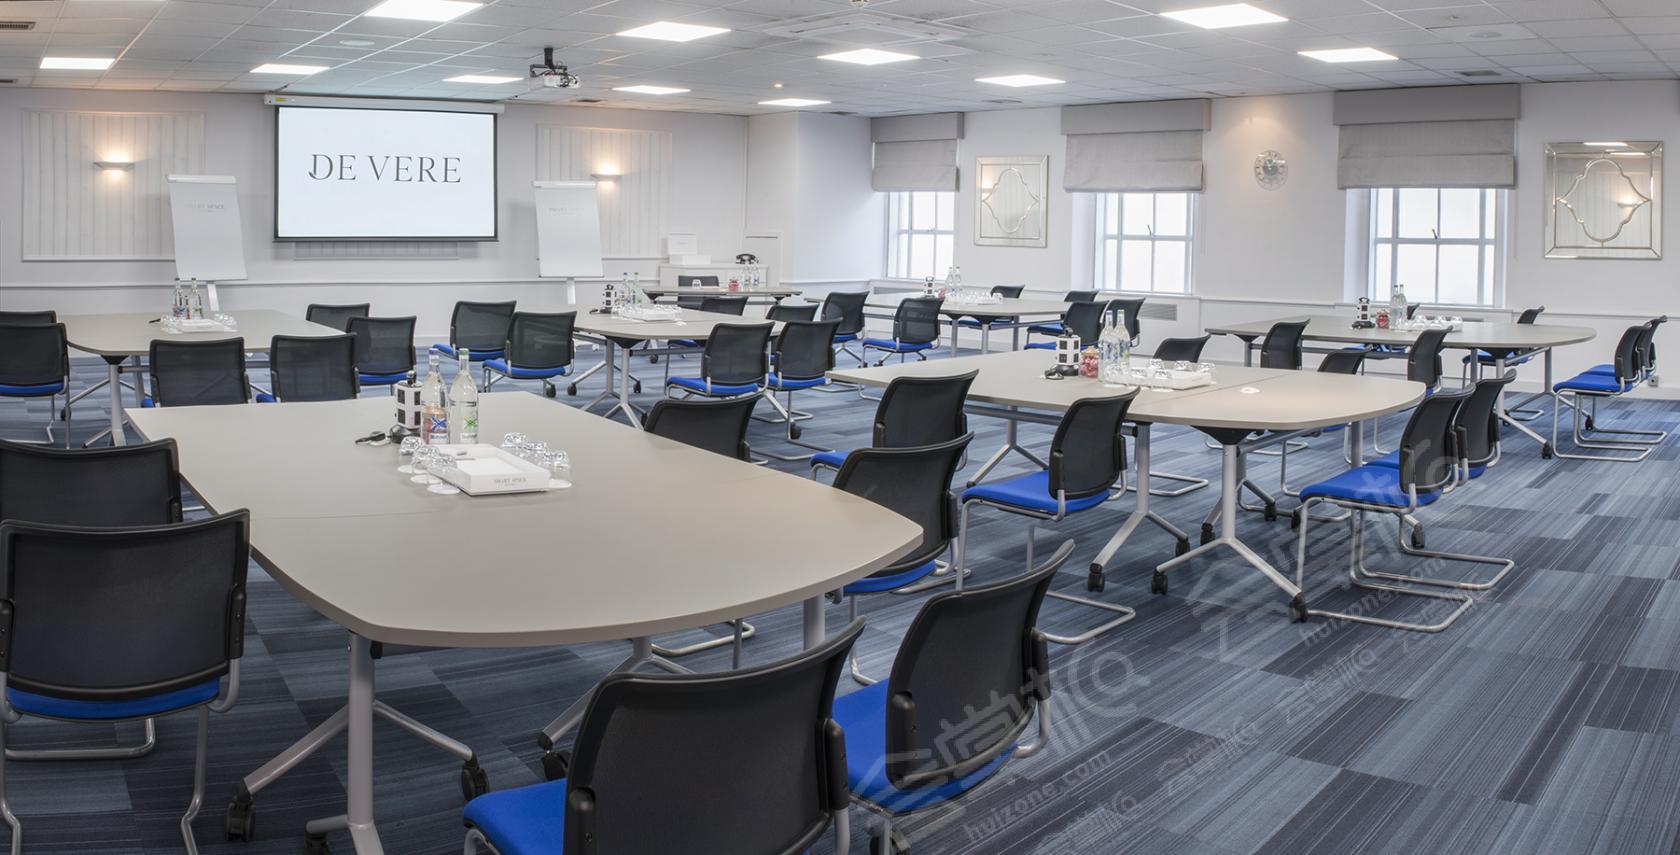 Large Meeting Rooms